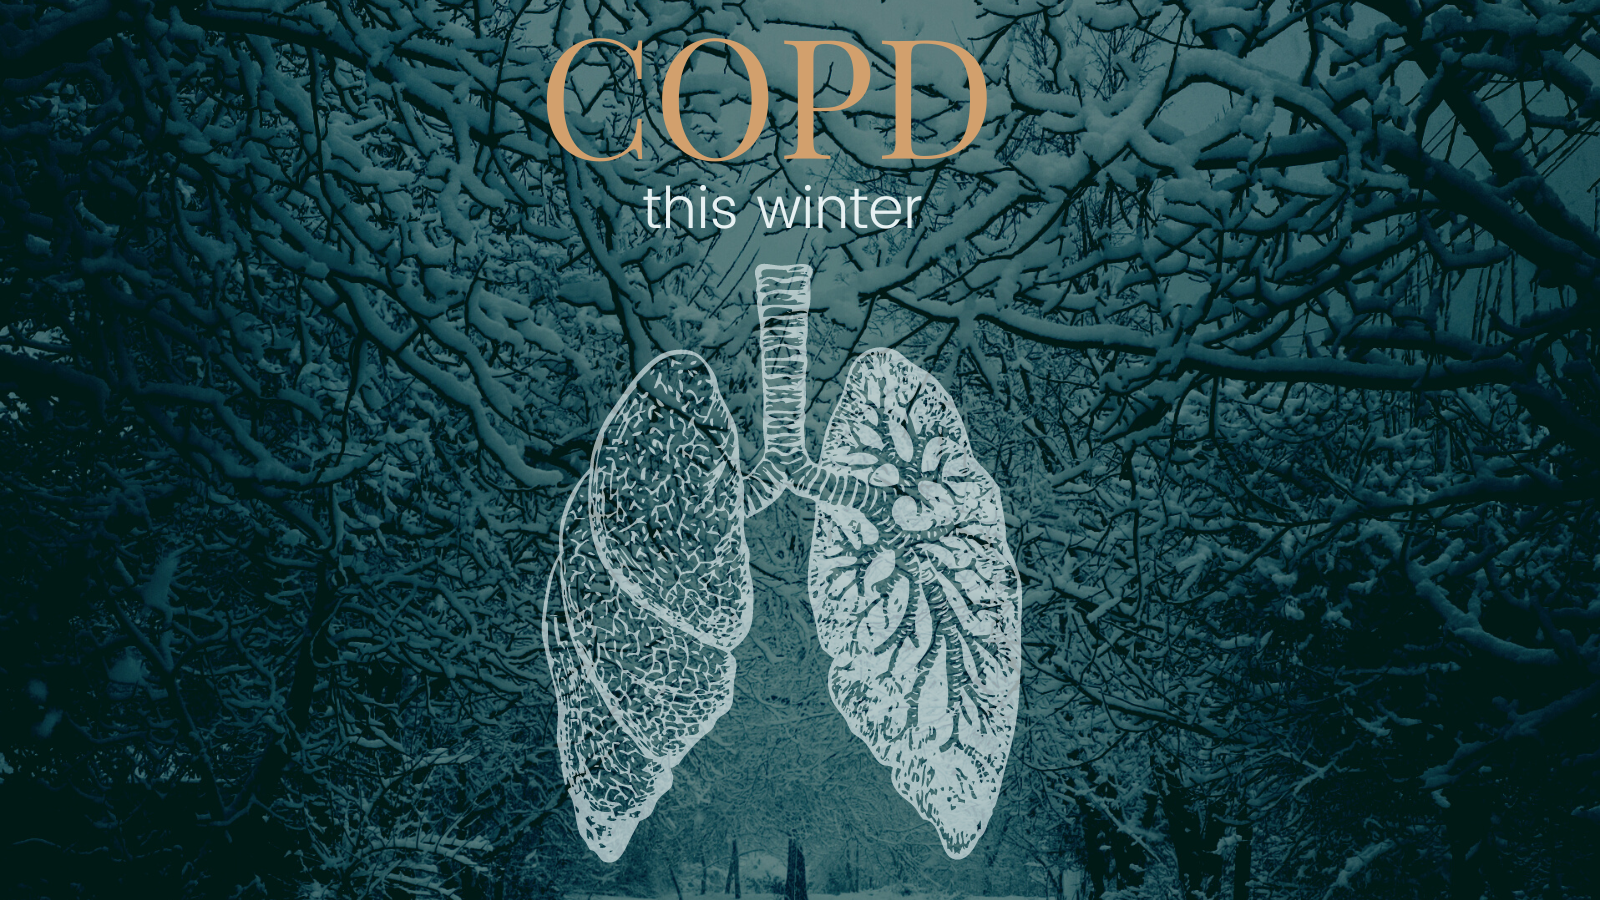 Living with COPD this winter